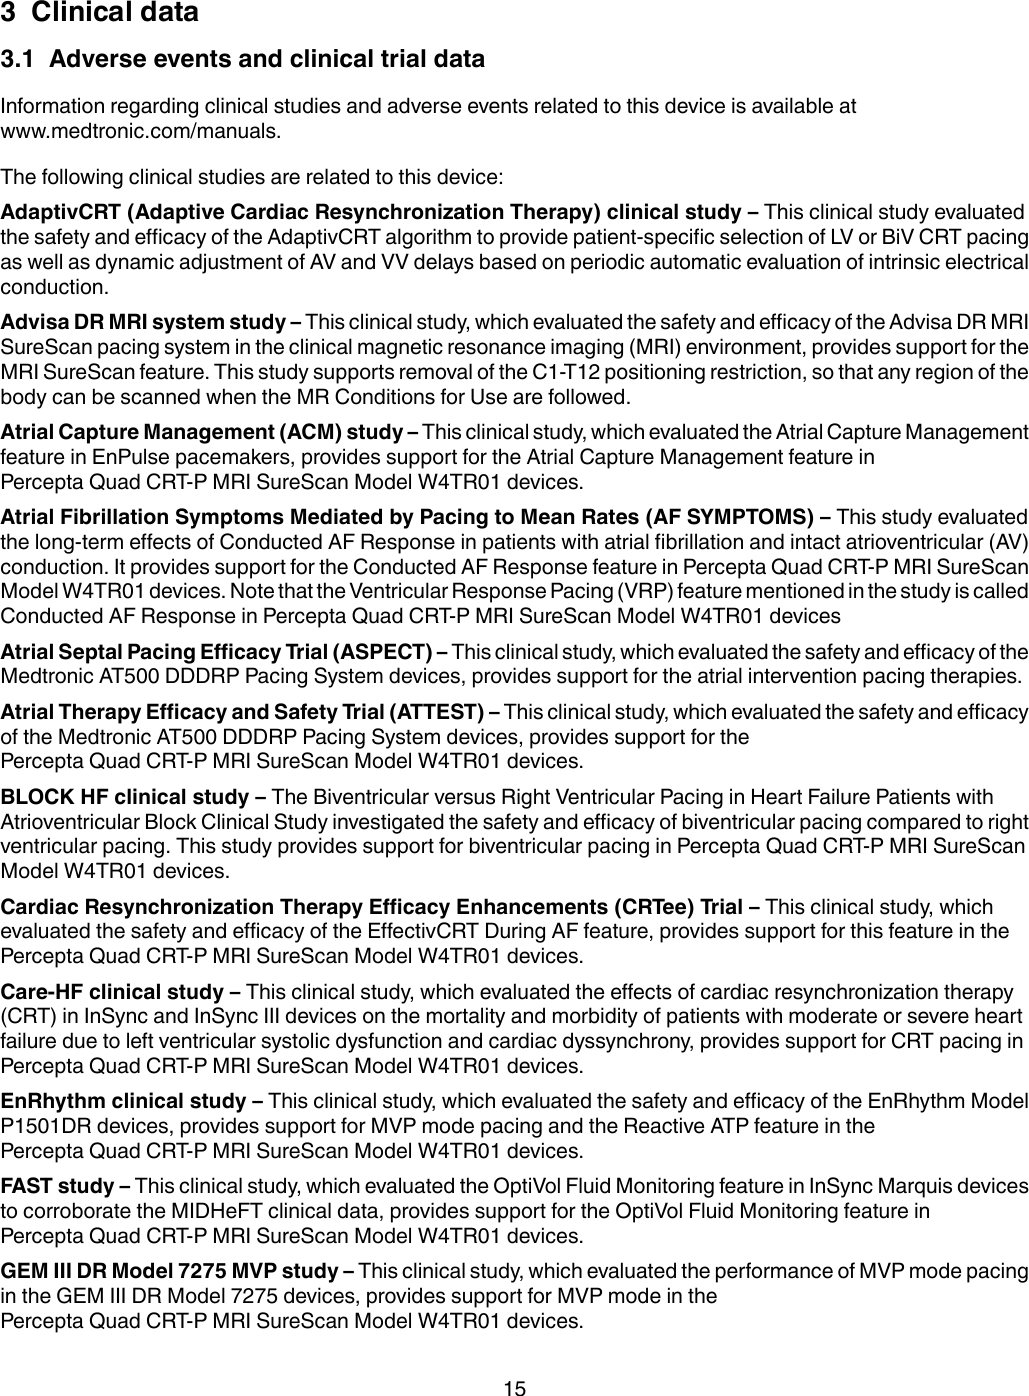 3  Clinical data3.1  Adverse events and clinical trial dataInformation regarding clinical studies and adverse events related to this device is available atwww.medtronic.com/manuals.The following clinical studies are related to this device:AdaptivCRT (Adaptive Cardiac Resynchronization Therapy) clinical study – This clinical study evaluatedthe safety and efficacy of the AdaptivCRT algorithm to provide patient-specific selection of LV or BiV CRT pacingas well as dynamic adjustment of AV and VV delays based on periodic automatic evaluation of intrinsic electricalconduction.Advisa DR MRI system study – This clinical study, which evaluated the safety and efficacy of the Advisa DR MRISureScan pacing system in the clinical magnetic resonance imaging (MRI) environment, provides support for theMRI SureScan feature. This study supports removal of the C1-T12 positioning restriction, so that any region of thebody can be scanned when the MR Conditions for Use are followed.Atrial Capture Management (ACM) study – This clinical study, which evaluated the Atrial Capture Managementfeature in EnPulse pacemakers, provides support for the Atrial Capture Management feature inPercepta Quad CRT-P MRI SureScan Model W4TR01 devices.Atrial Fibrillation Symptoms Mediated by Pacing to Mean Rates (AF SYMPTOMS) – This study evaluatedthe long-term effects of Conducted AF Response in patients with atrial fibrillation and intact atrioventricular (AV)conduction. It provides support for the Conducted AF Response feature in Percepta Quad CRT-P MRI SureScanModel W4TR01 devices. Note that the Ventricular Response Pacing (VRP) feature mentioned in the study is calledConducted AF Response in Percepta Quad CRT-P MRI SureScan Model W4TR01 devicesAtrial Septal Pacing Efficacy Trial (ASPECT) – This clinical study, which evaluated the safety and efficacy of theMedtronic AT500 DDDRP Pacing System devices, provides support for the atrial intervention pacing therapies.Atrial Therapy Efficacy and Safety Trial (ATTEST) – This clinical study, which evaluated the safety and efficacyof the Medtronic AT500 DDDRP Pacing System devices, provides support for thePercepta Quad CRT-P MRI SureScan Model W4TR01 devices.BLOCK HF clinical study – The Biventricular versus Right Ventricular Pacing in Heart Failure Patients withAtrioventricular Block Clinical Study investigated the safety and efficacy of biventricular pacing compared to rightventricular pacing. This study provides support for biventricular pacing in Percepta Quad CRT-P MRI SureScanModel W4TR01 devices.Cardiac Resynchronization Therapy Efficacy Enhancements (CRTee) Trial – This clinical study, whichevaluated the safety and efficacy of the EffectivCRT During AF feature, provides support for this feature in thePercepta Quad CRT-P MRI SureScan Model W4TR01 devices.Care-HF clinical study – This clinical study, which evaluated the effects of cardiac resynchronization therapy(CRT) in InSync and InSync III devices on the mortality and morbidity of patients with moderate or severe heartfailure due to left ventricular systolic dysfunction and cardiac dyssynchrony, provides support for CRT pacing inPercepta Quad CRT-P MRI SureScan Model W4TR01 devices.EnRhythm clinical study – This clinical study, which evaluated the safety and efficacy of the EnRhythm ModelP1501DR devices, provides support for MVP mode pacing and the Reactive ATP feature in thePercepta Quad CRT-P MRI SureScan Model W4TR01 devices.FAST study – This clinical study, which evaluated the OptiVol Fluid Monitoring feature in InSync Marquis devicesto corroborate the MIDHeFT clinical data, provides support for the OptiVol Fluid Monitoring feature inPercepta Quad CRT-P MRI SureScan Model W4TR01 devices.GEM III DR Model 7275 MVP study – This clinical study, which evaluated the performance of MVP mode pacingin the GEM III DR Model 7275 devices, provides support for MVP mode in thePercepta Quad CRT-P MRI SureScan Model W4TR01 devices.15